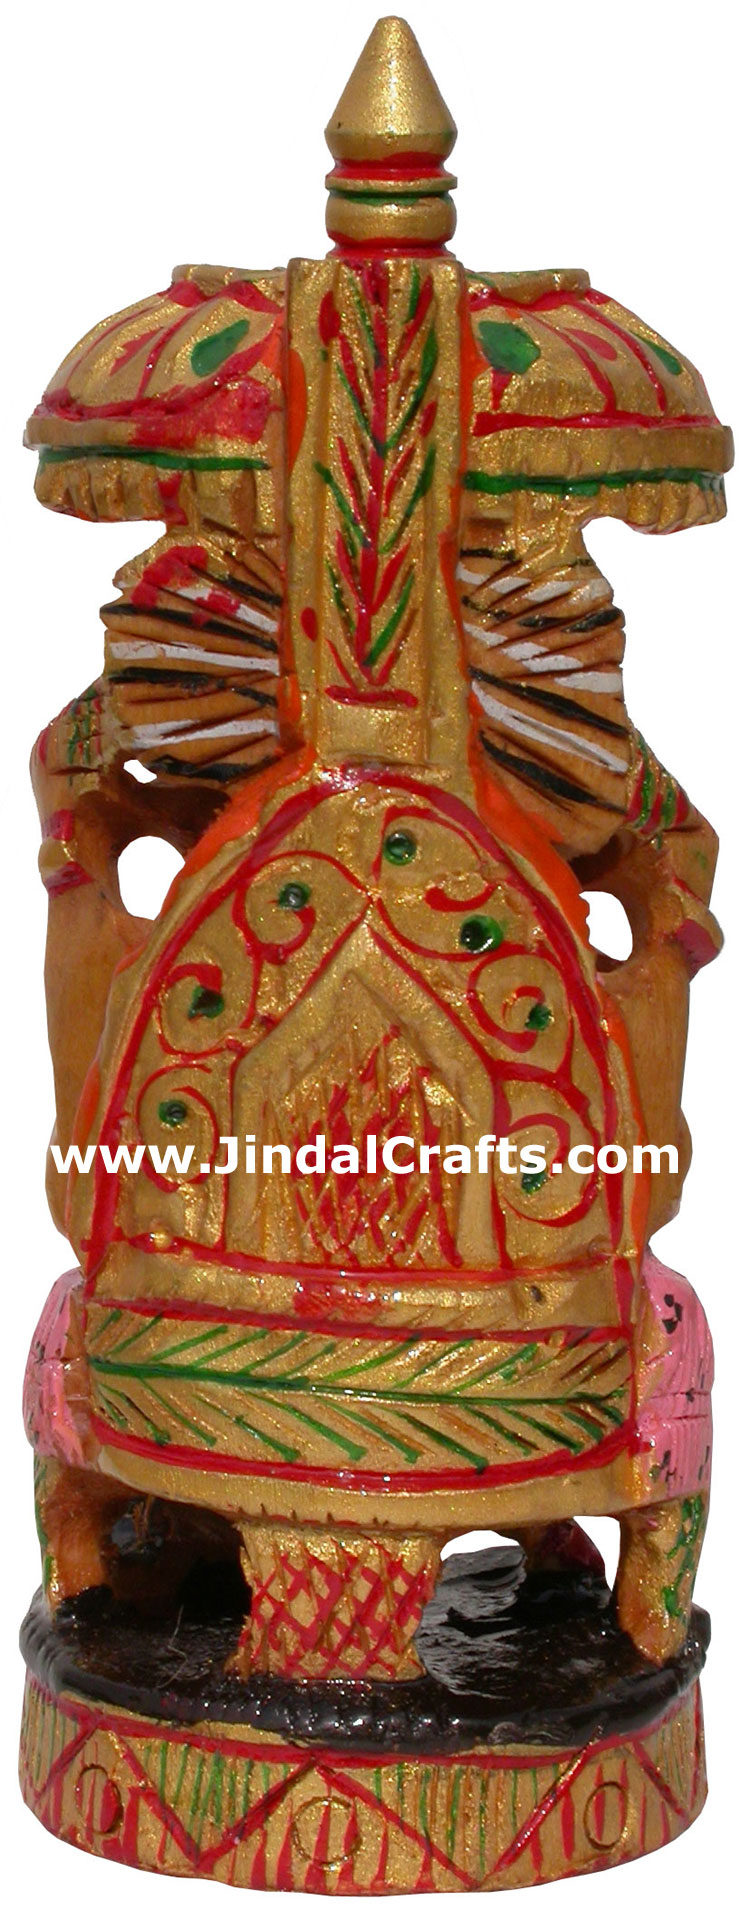 Handmade wooden carved painted Lord Ganesha India Arts